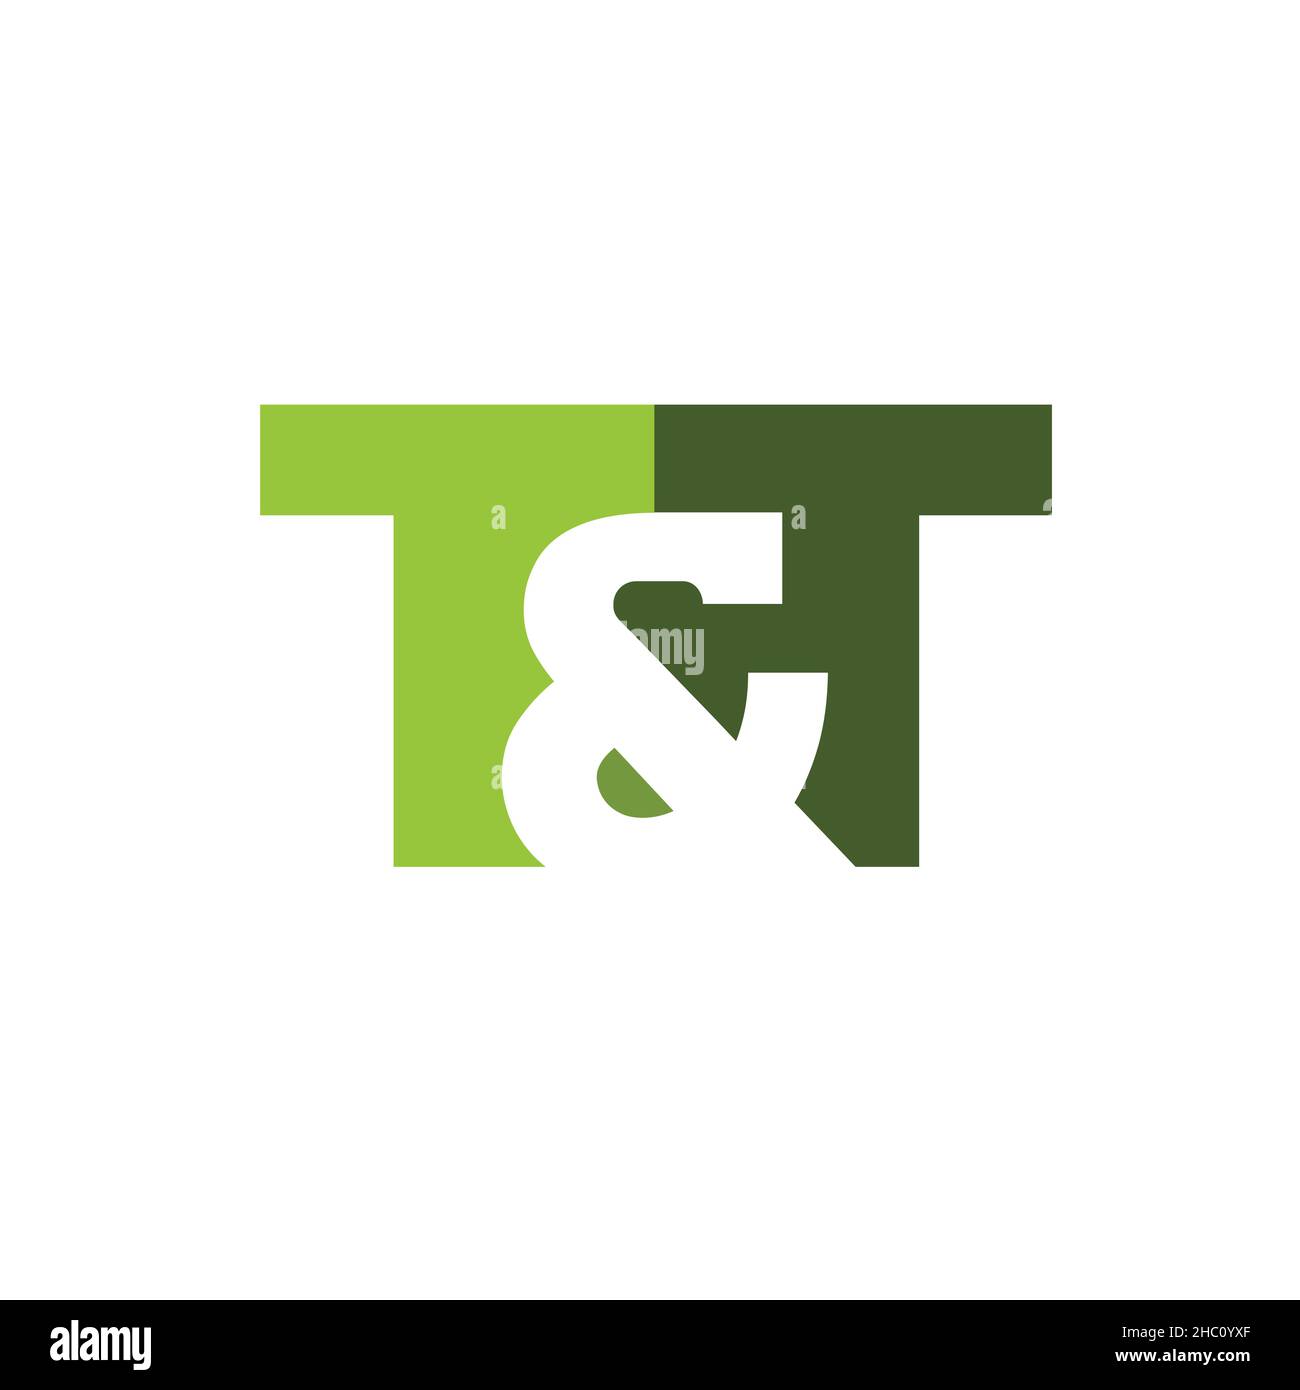 T and T letter based logo with a negative space  in between. Stock Vector